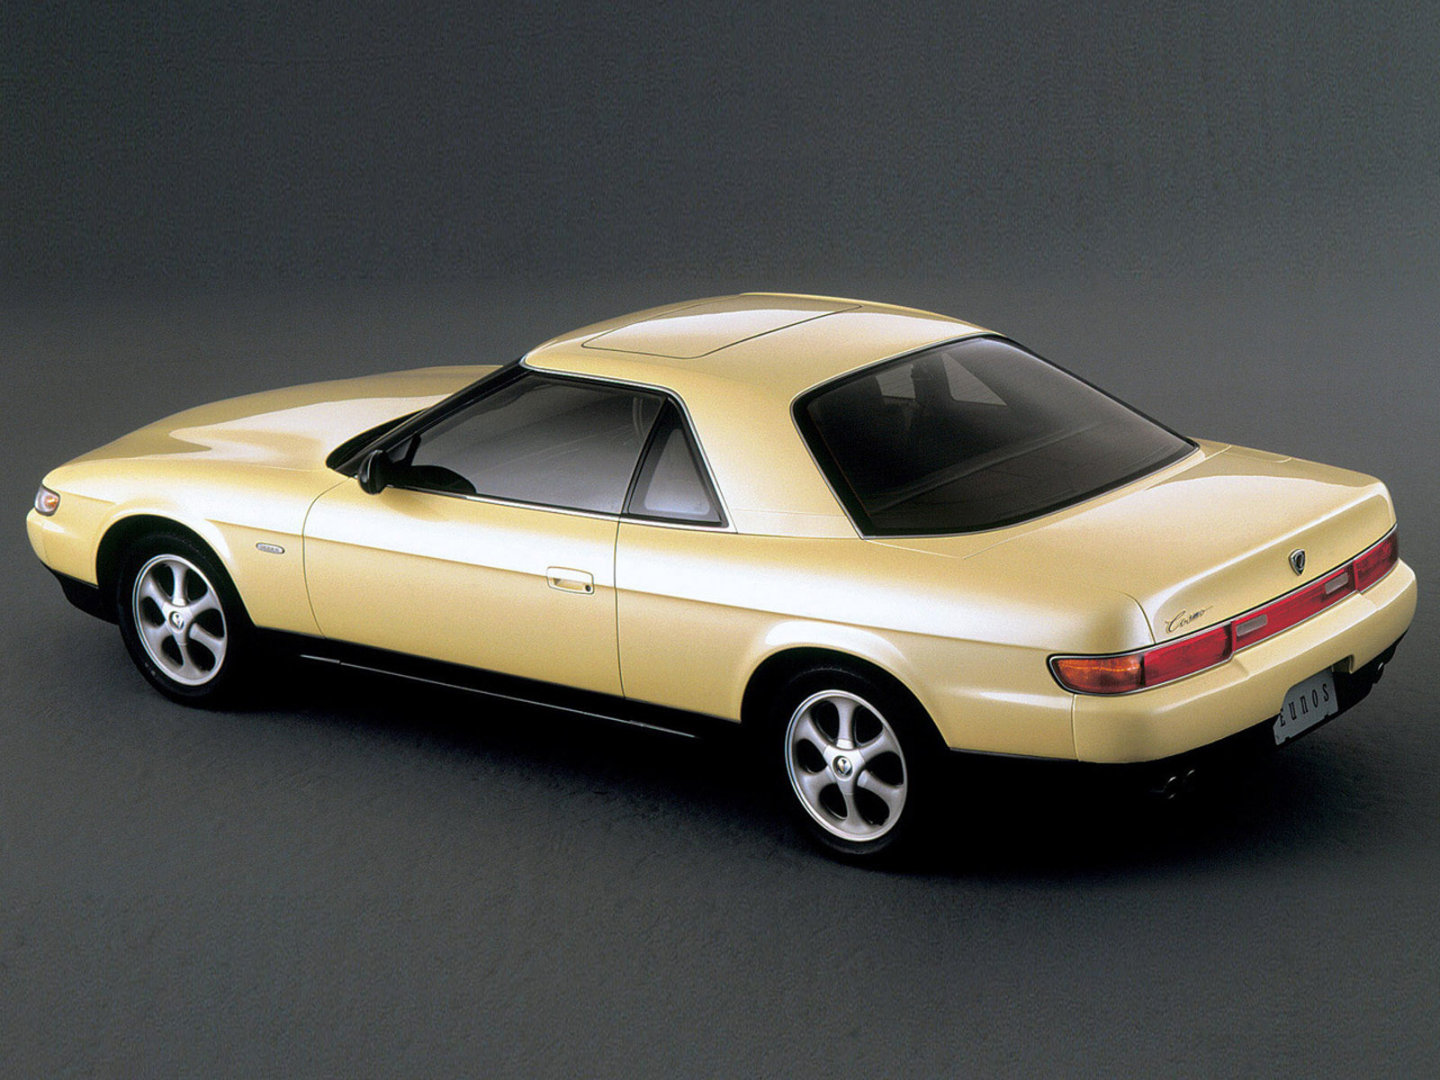 1990 -1995 Mazda Eunos Cosmo: The Once and Future King of the